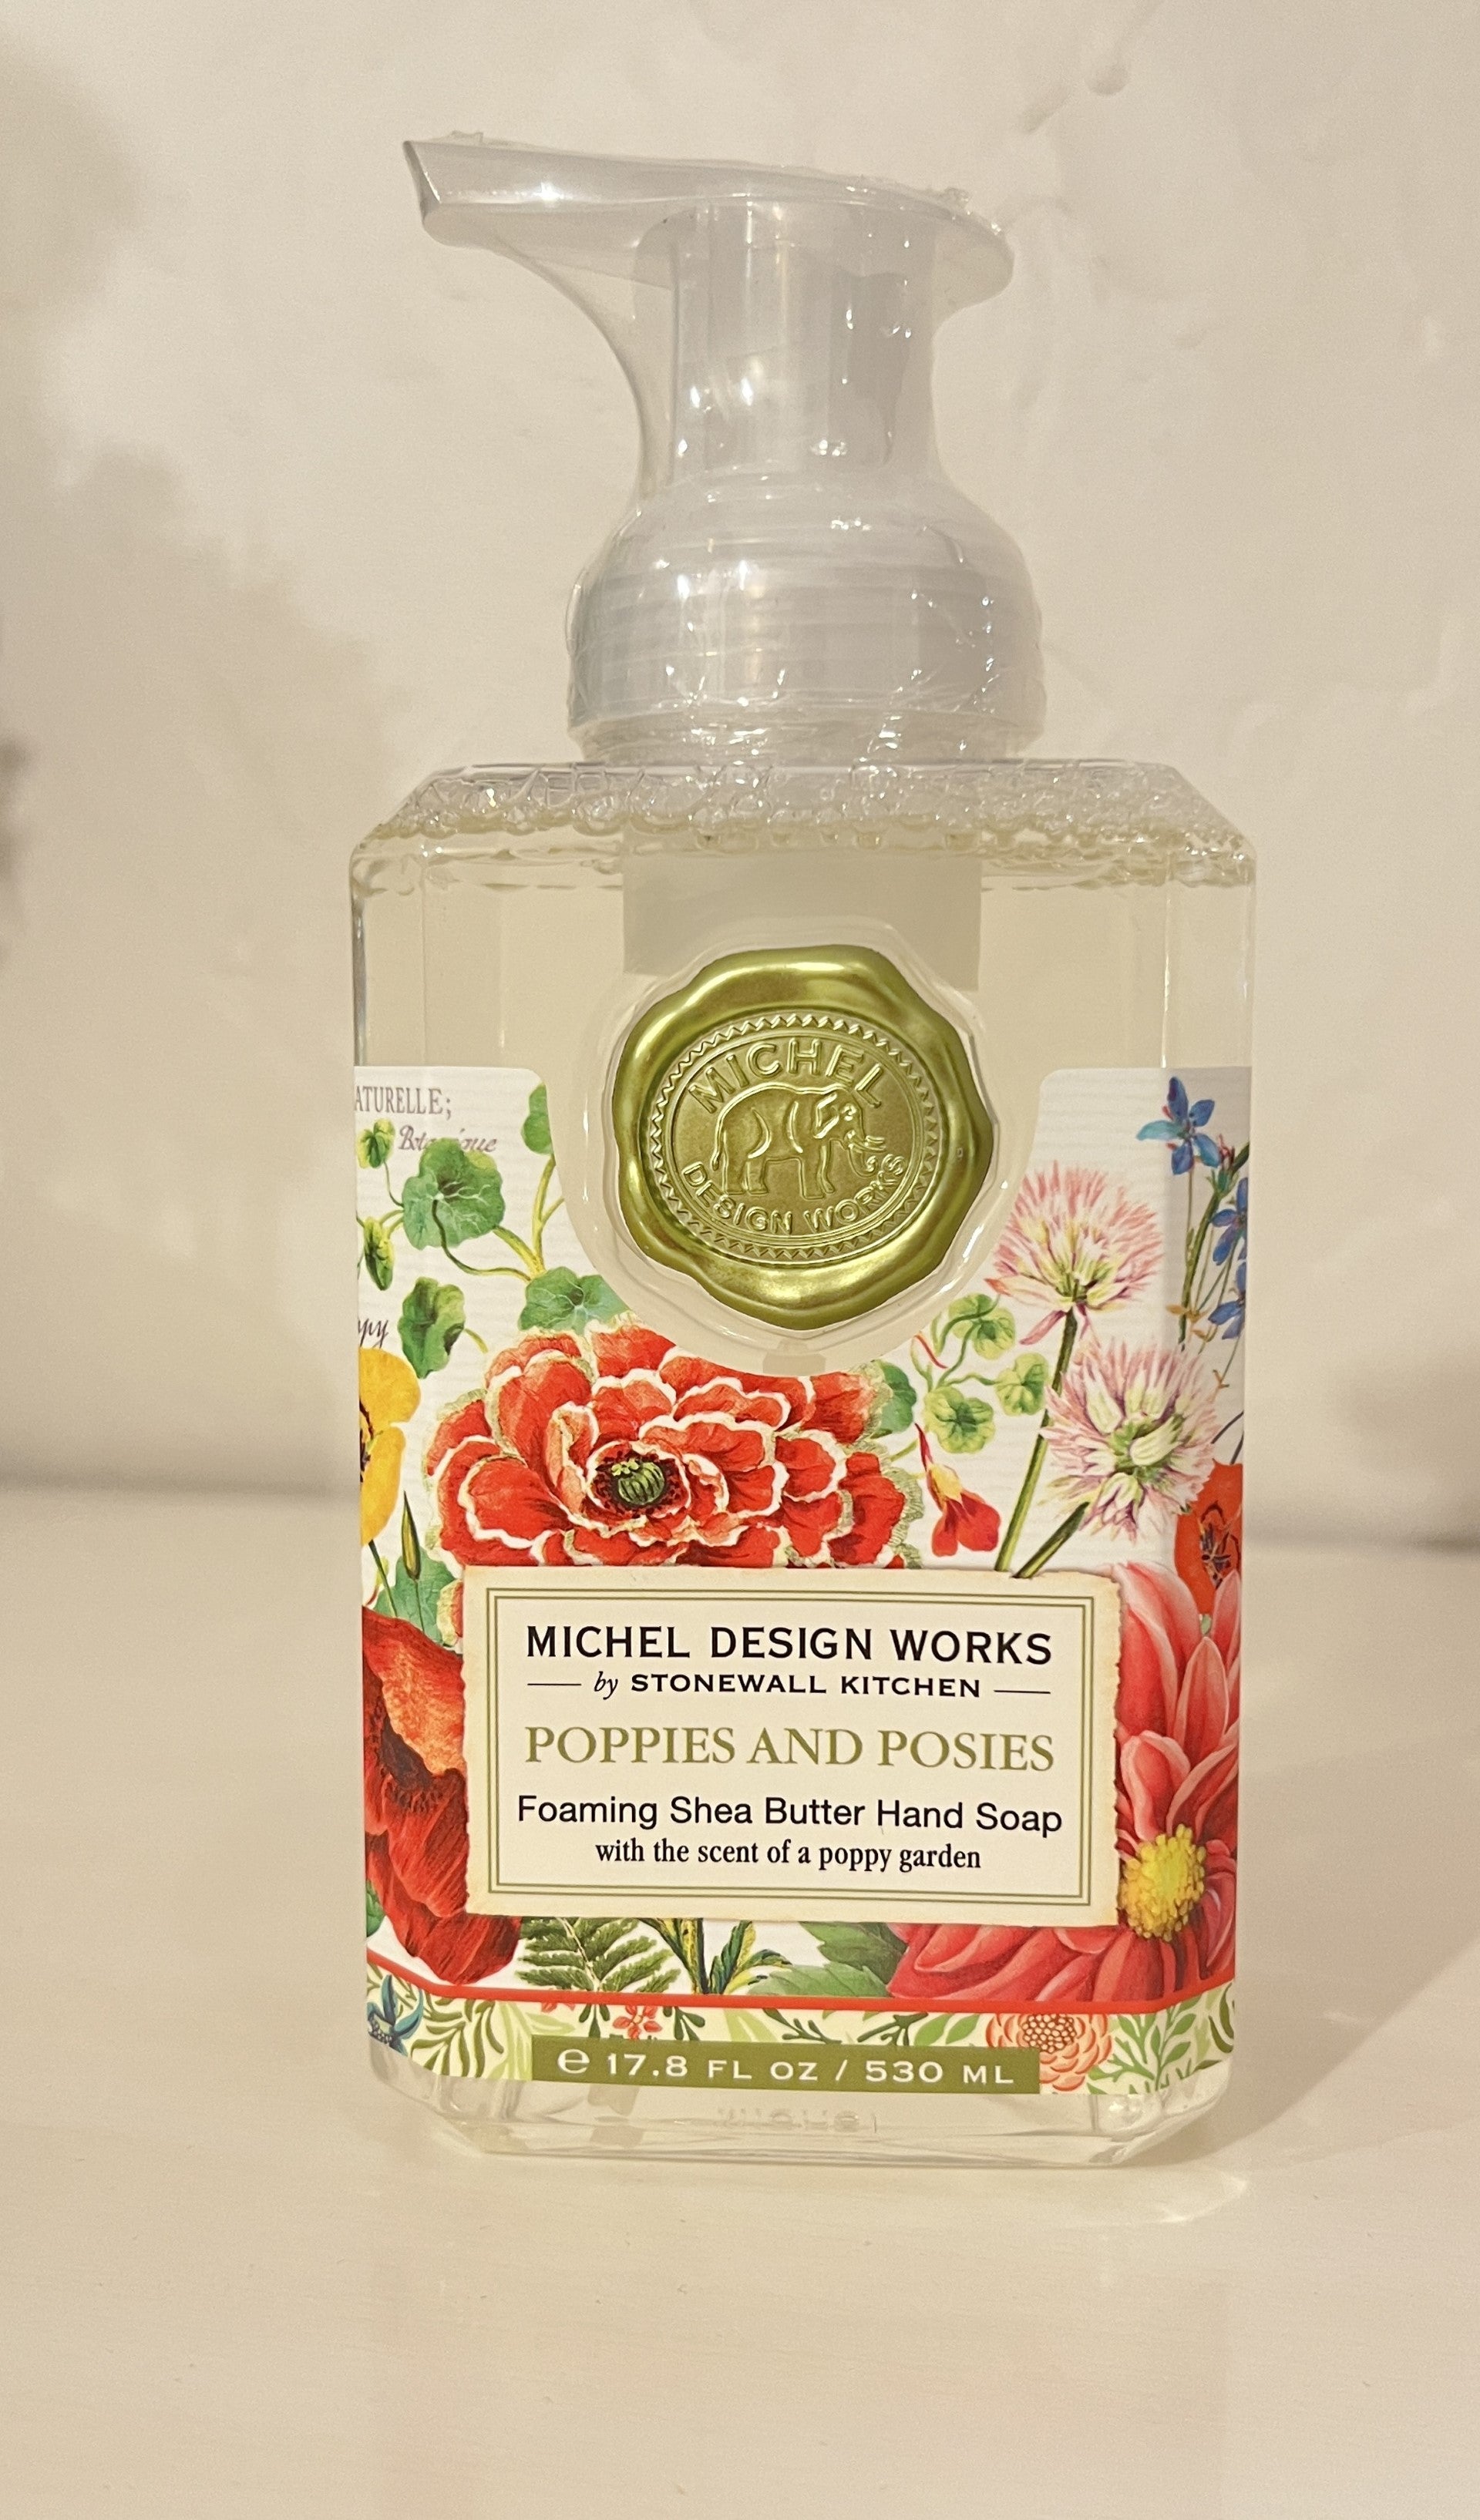 Poppies And Posies Foaming Shea Butter Hand Soap